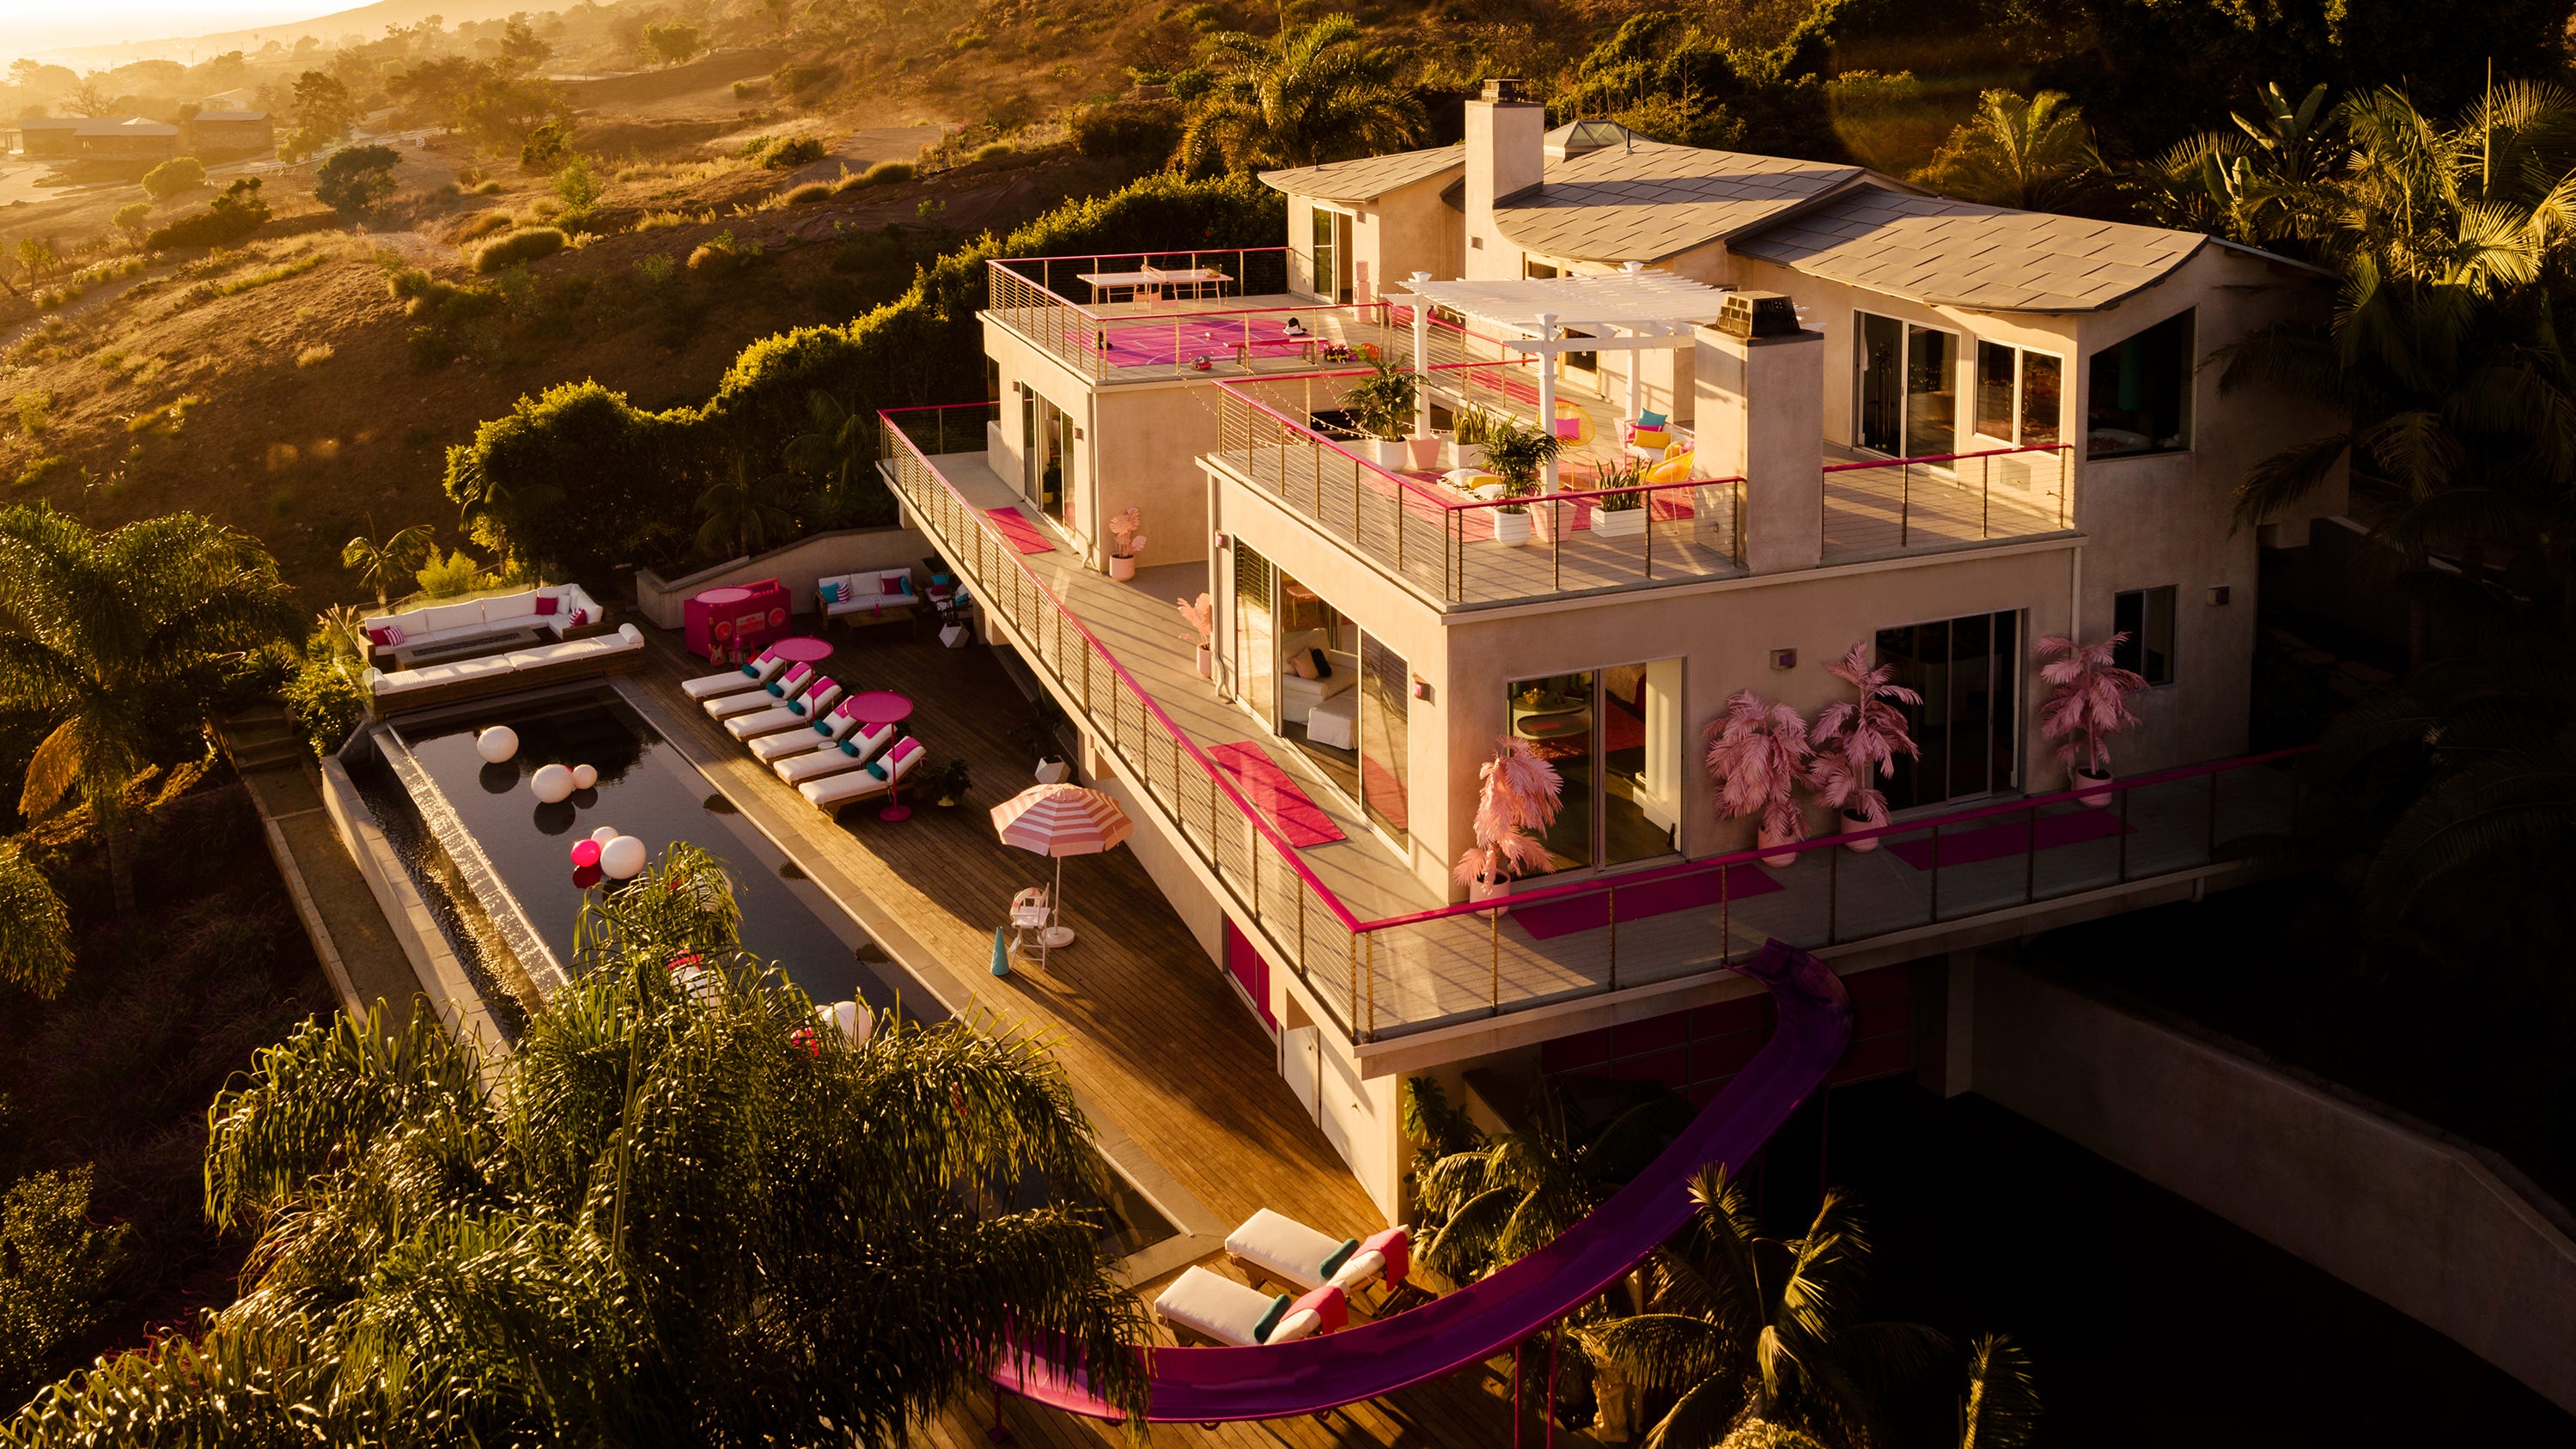 Barbie unveils reallife, hot pink Dreamhouse mansion on Airbnb